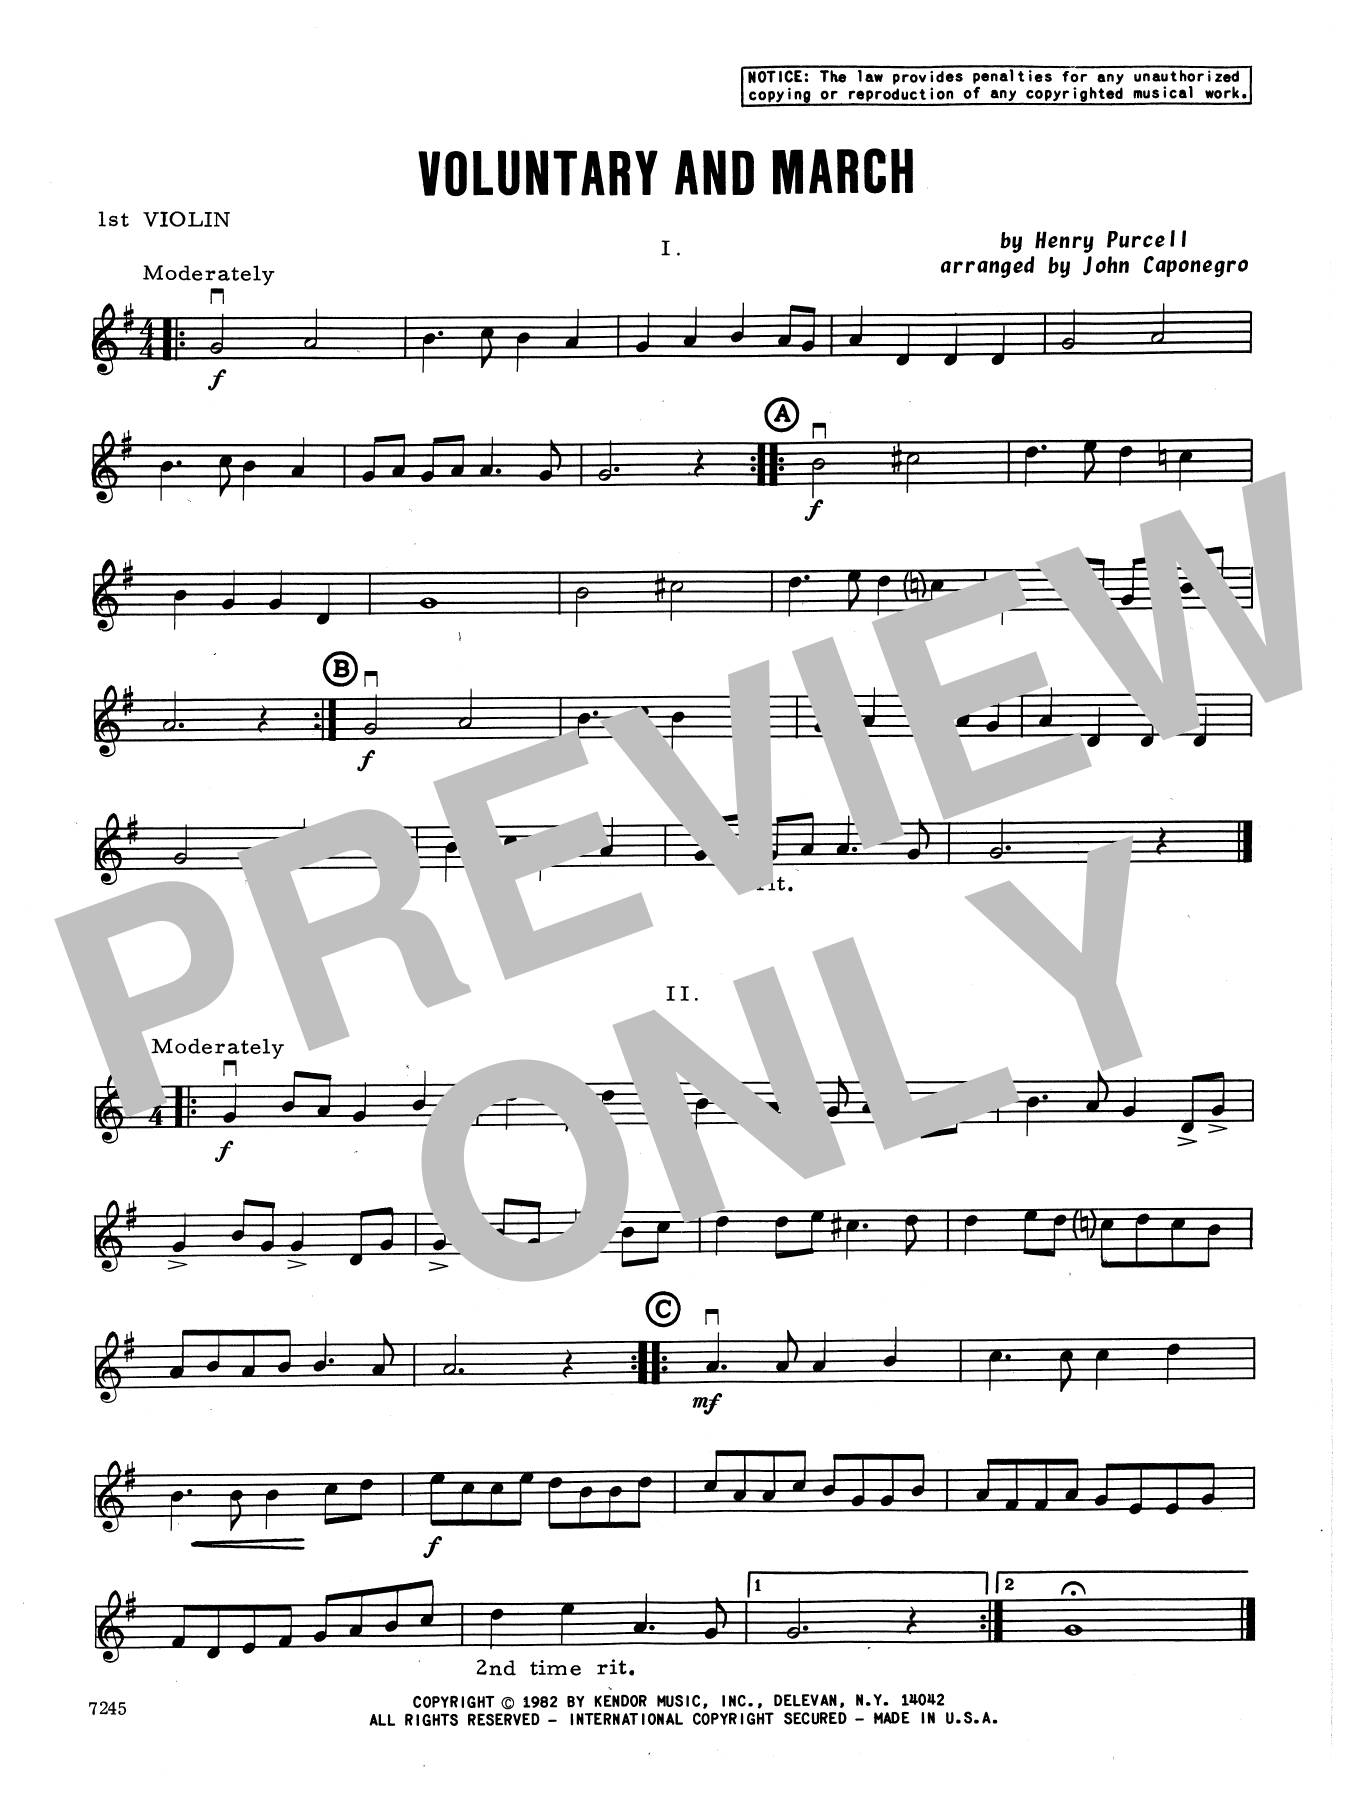 Download John Caponegro Voluntary and March - 1st Violin Sheet Music